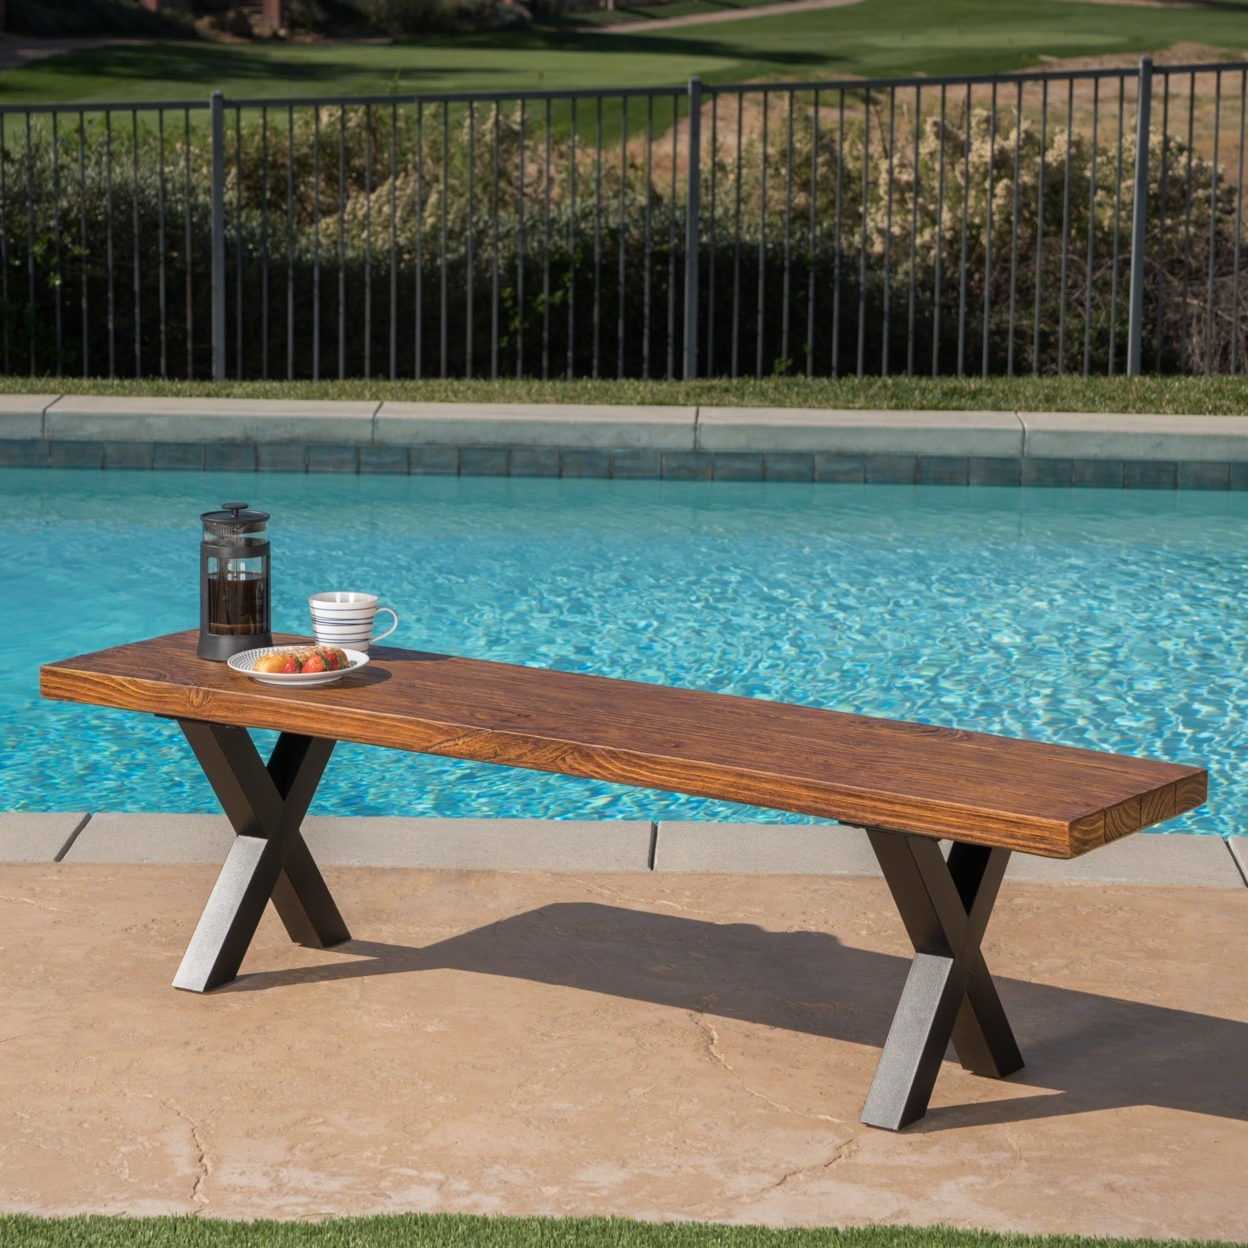 Cytheria Outdoor Brown Walnut Finish Lightweight Concrete Dining Bench